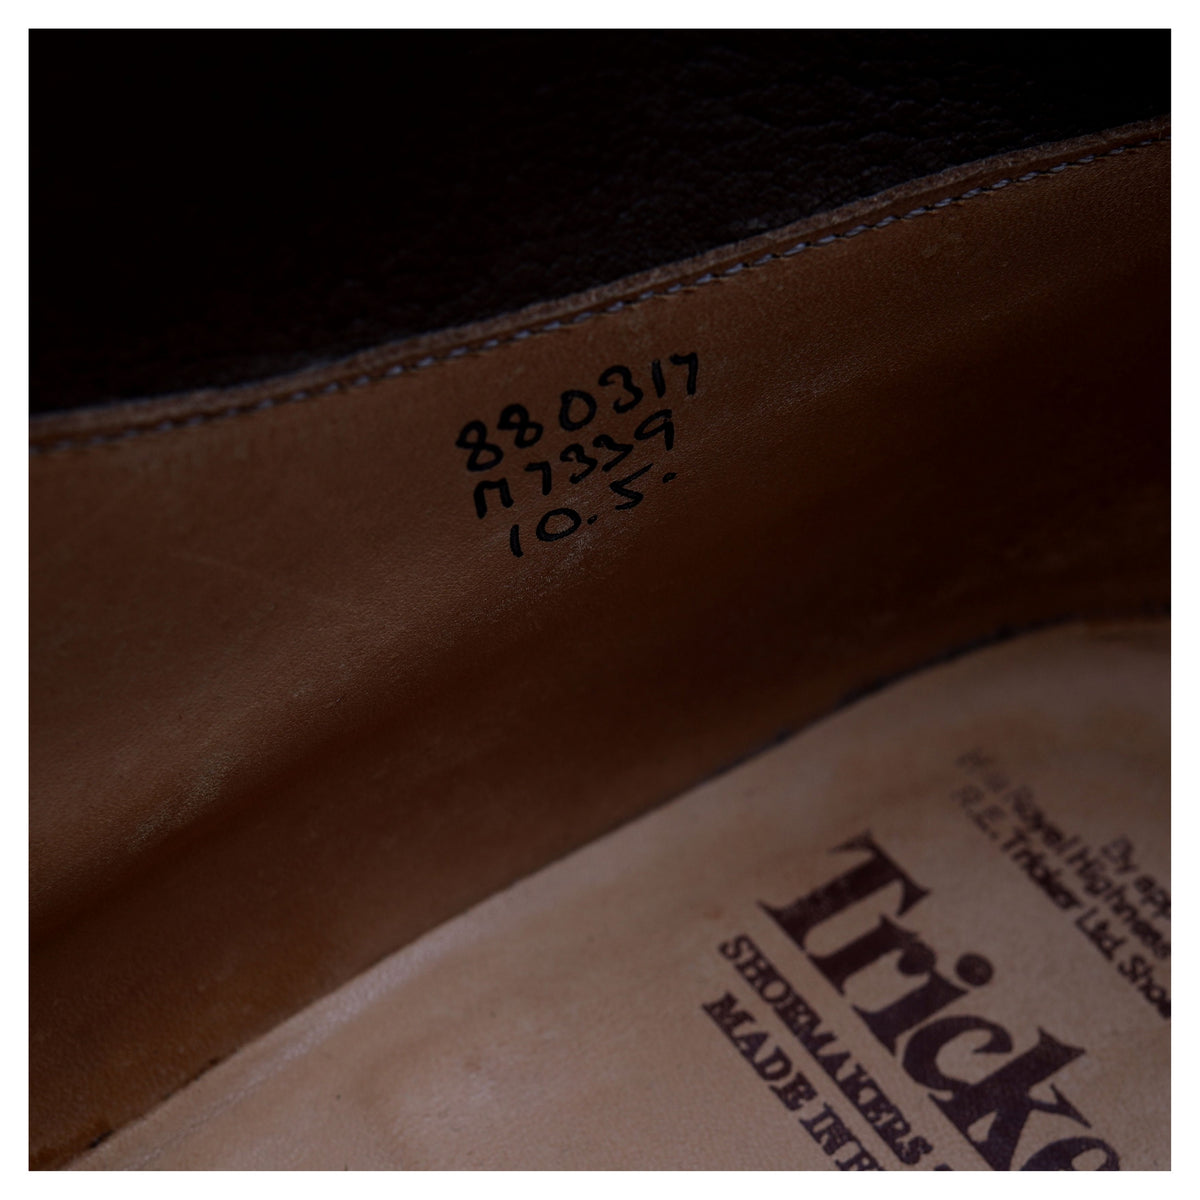 &#39;M7339&#39; Brown Suede Chukka Boots UK 10